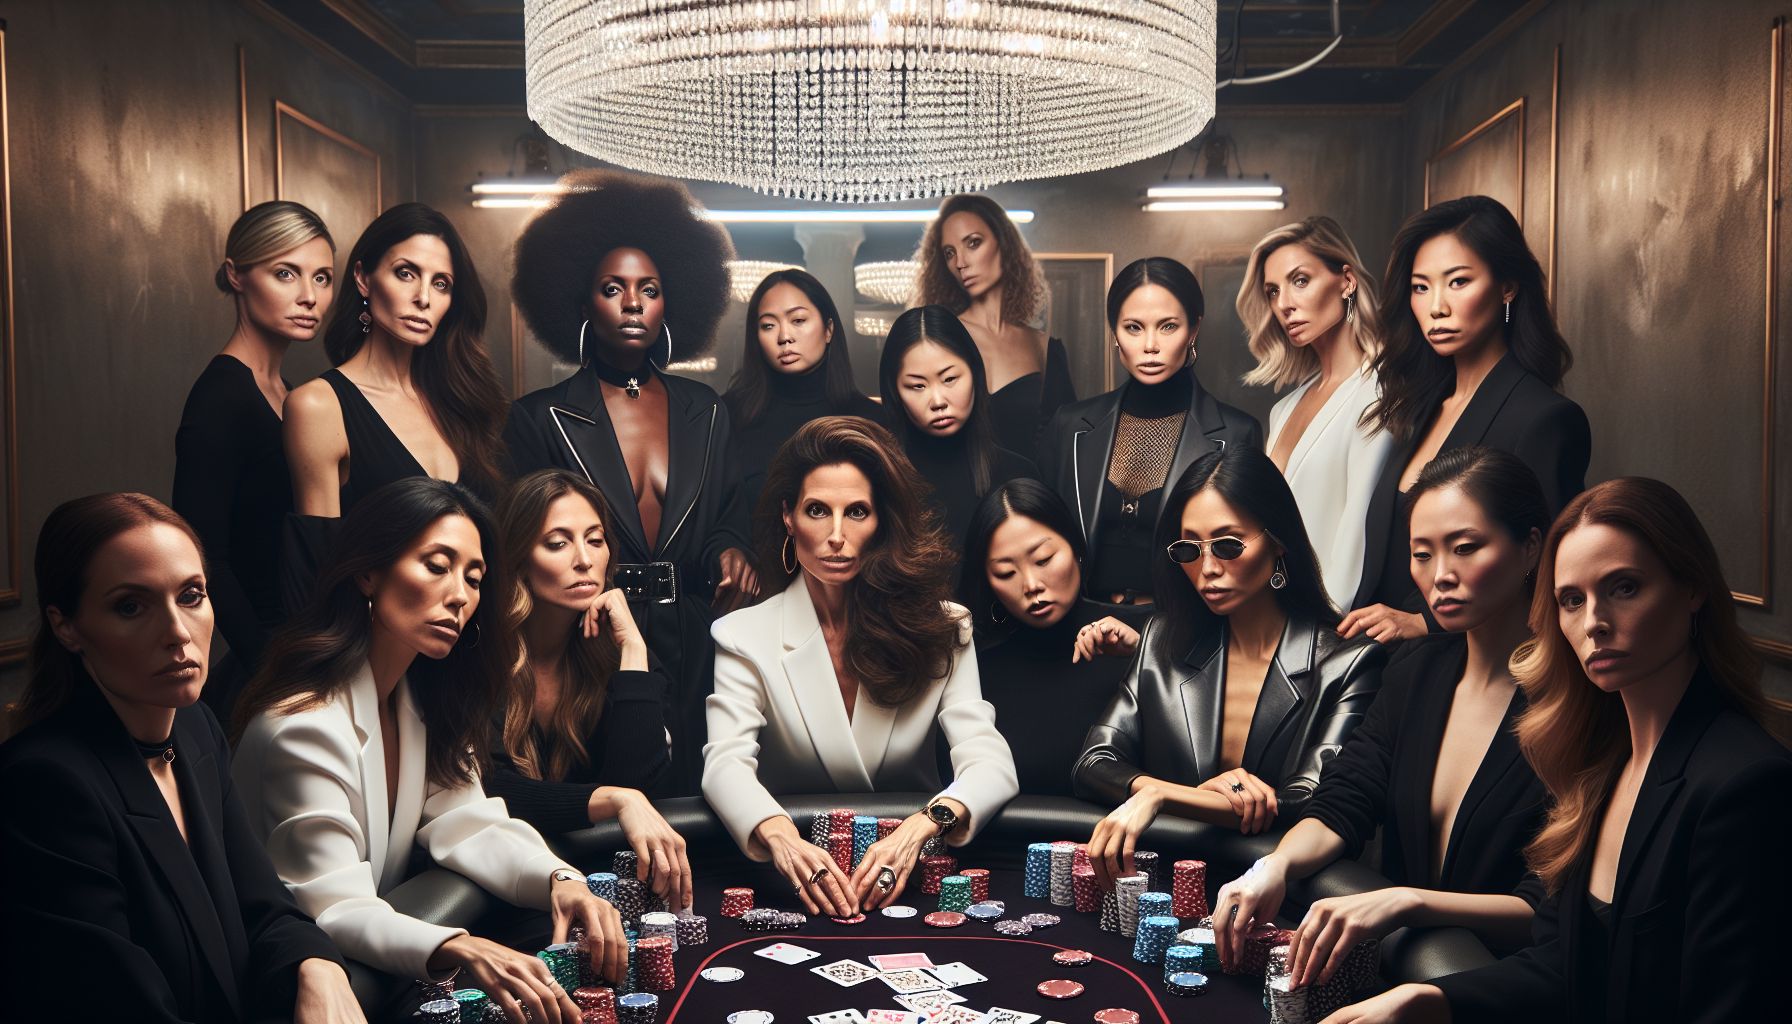 Women in Poker: Shattering the Glass Ceiling at the Casino